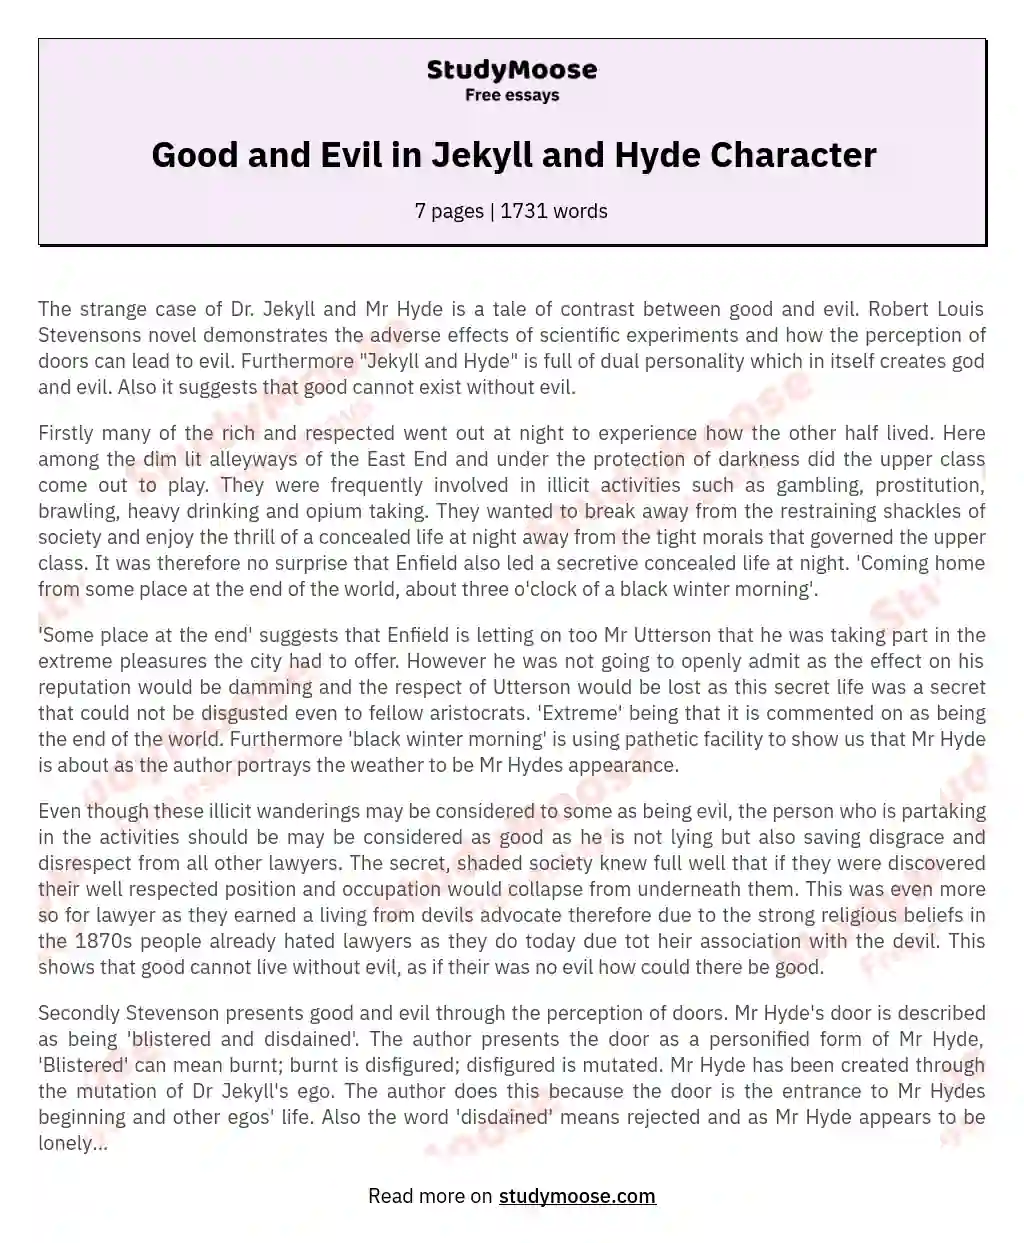 Good and Evil in Jekyll and Hyde Character